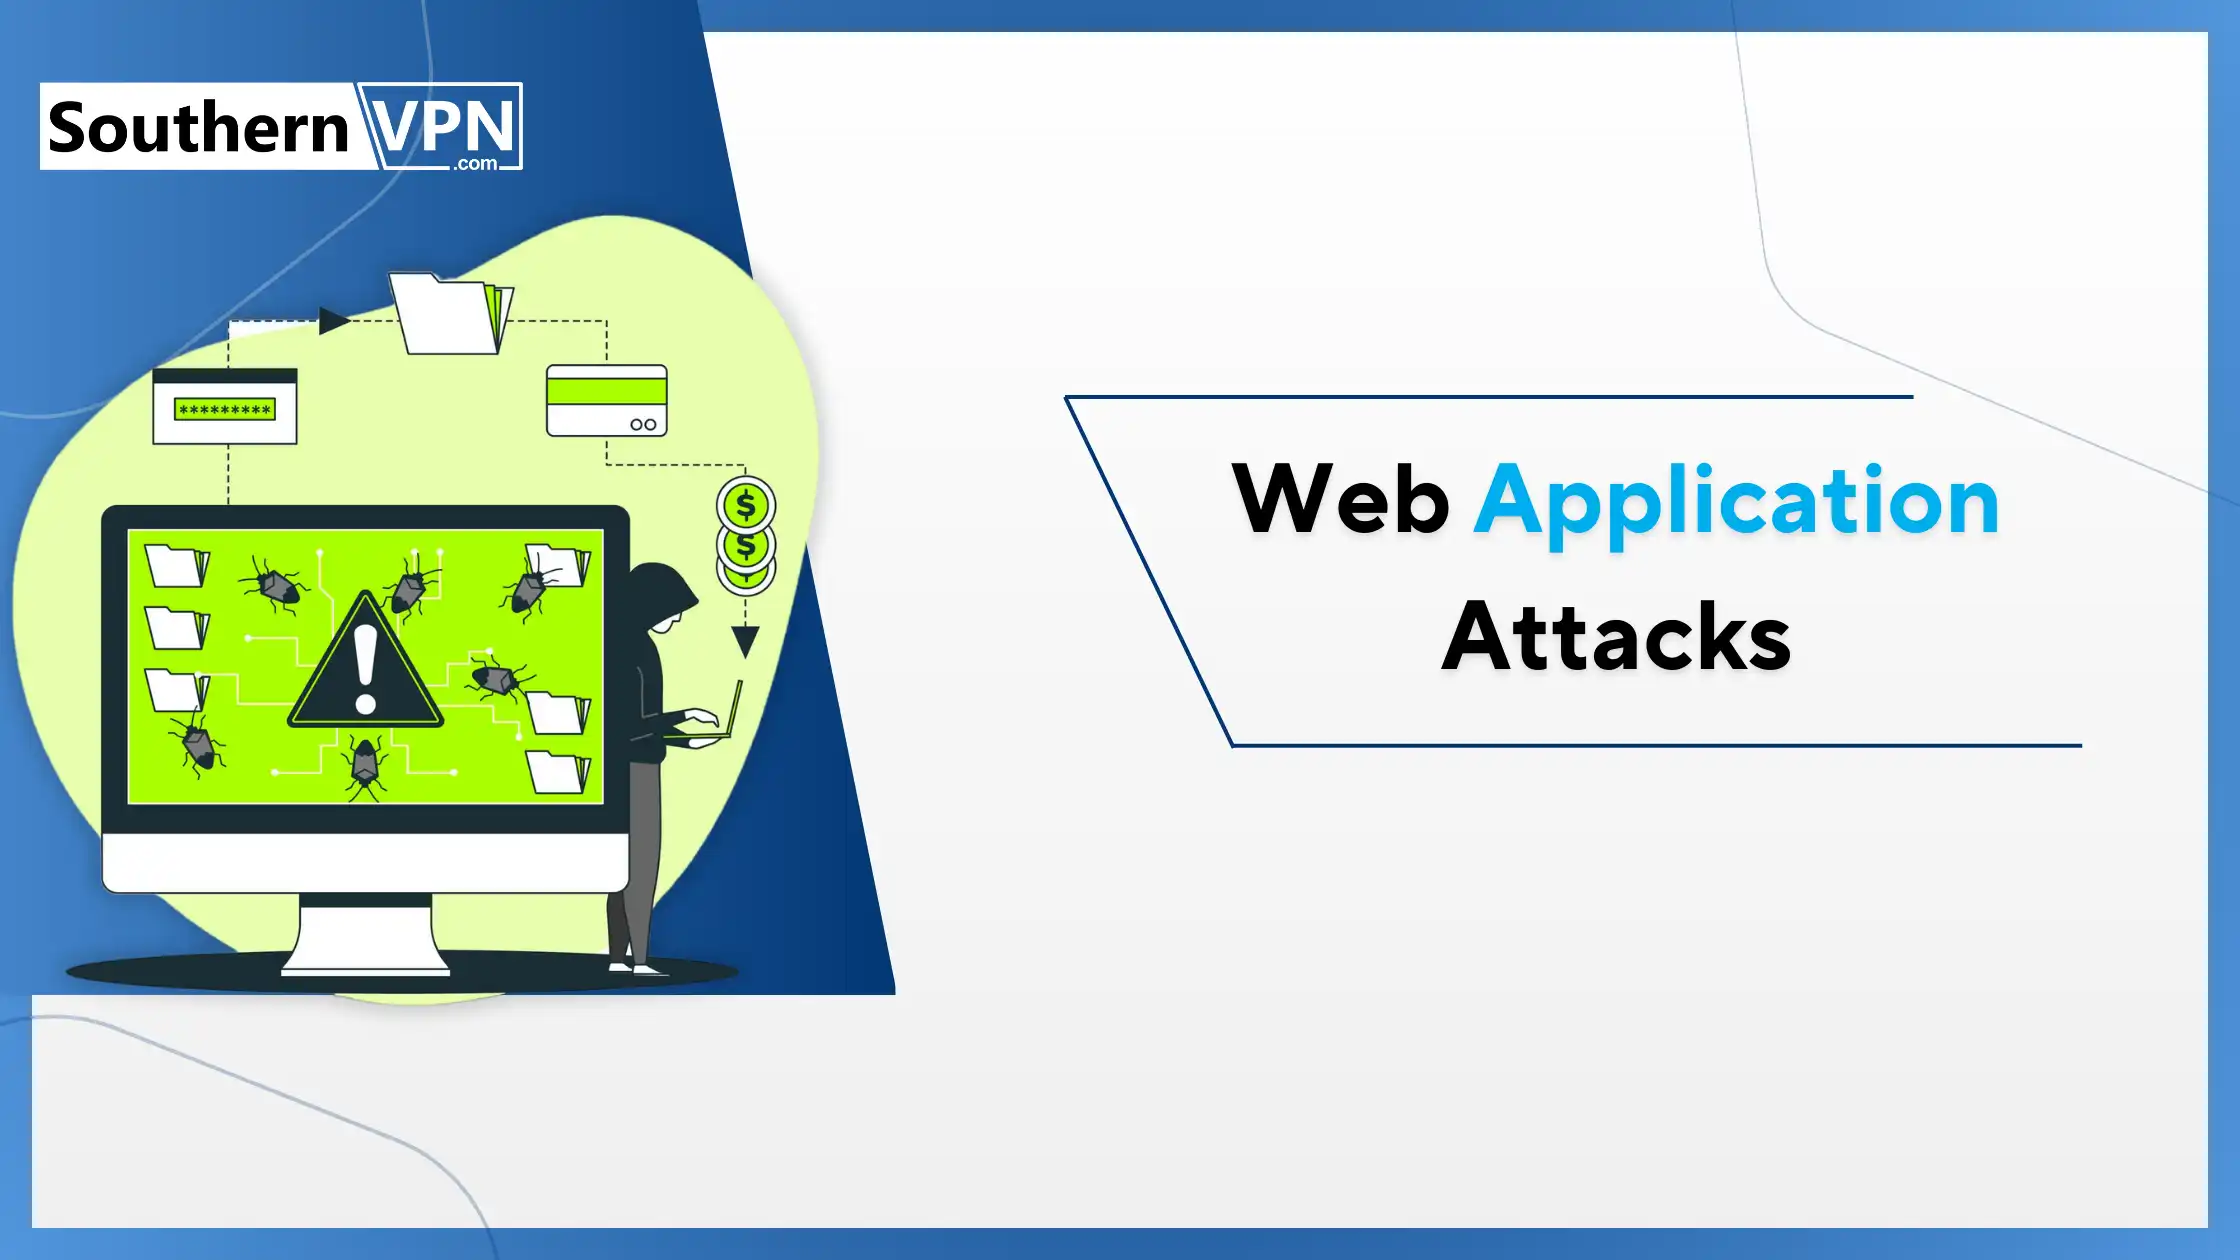 Illustration showing a hacker and a computer infected with bugs, representing web application attacks, highlighting types of cyber attacks.